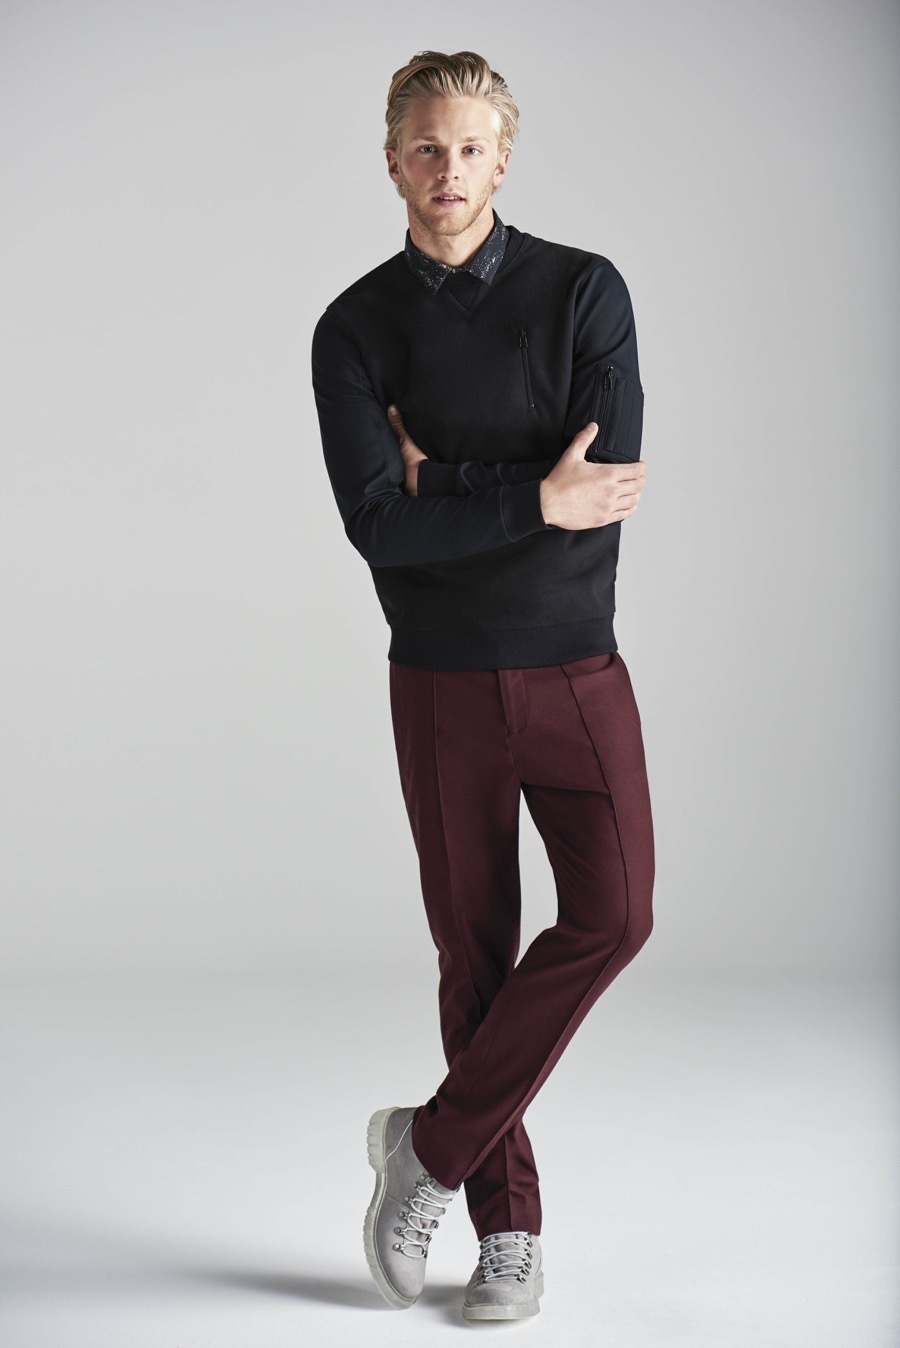 Stylish Outfit for Men: Maroon Pants with a Blue Shirt